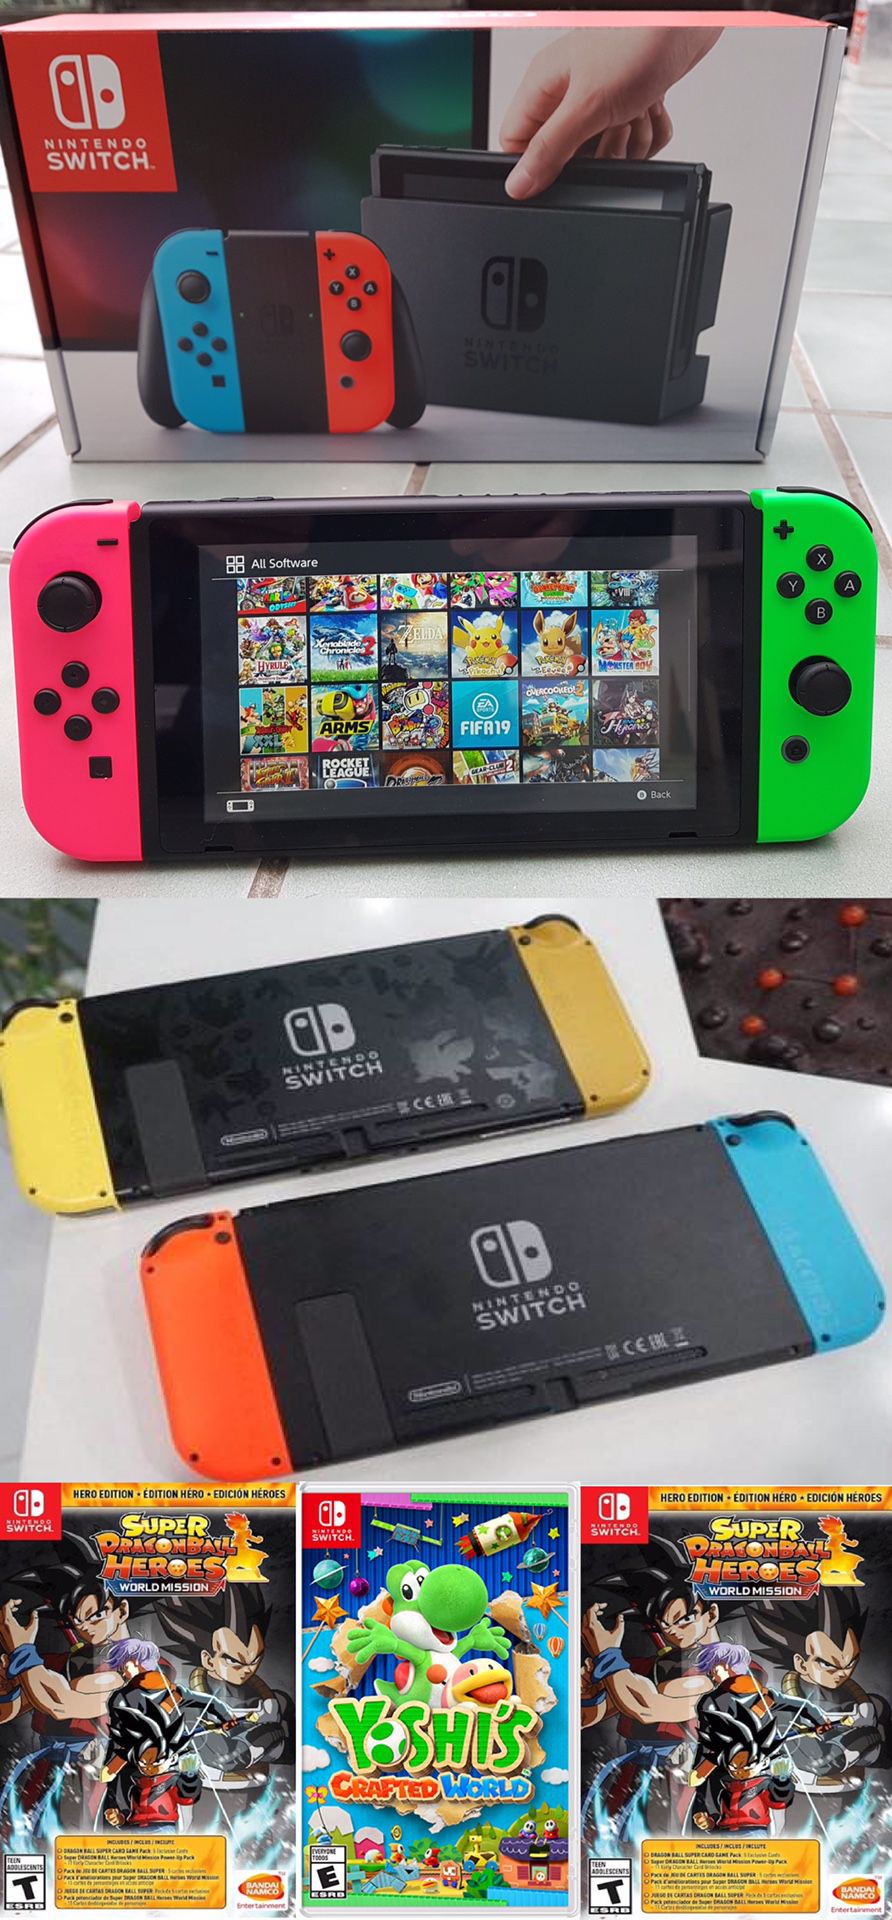 Nintendo Switch (Modded) 250 games, online mode, dual system, Retros, USB hard drive support